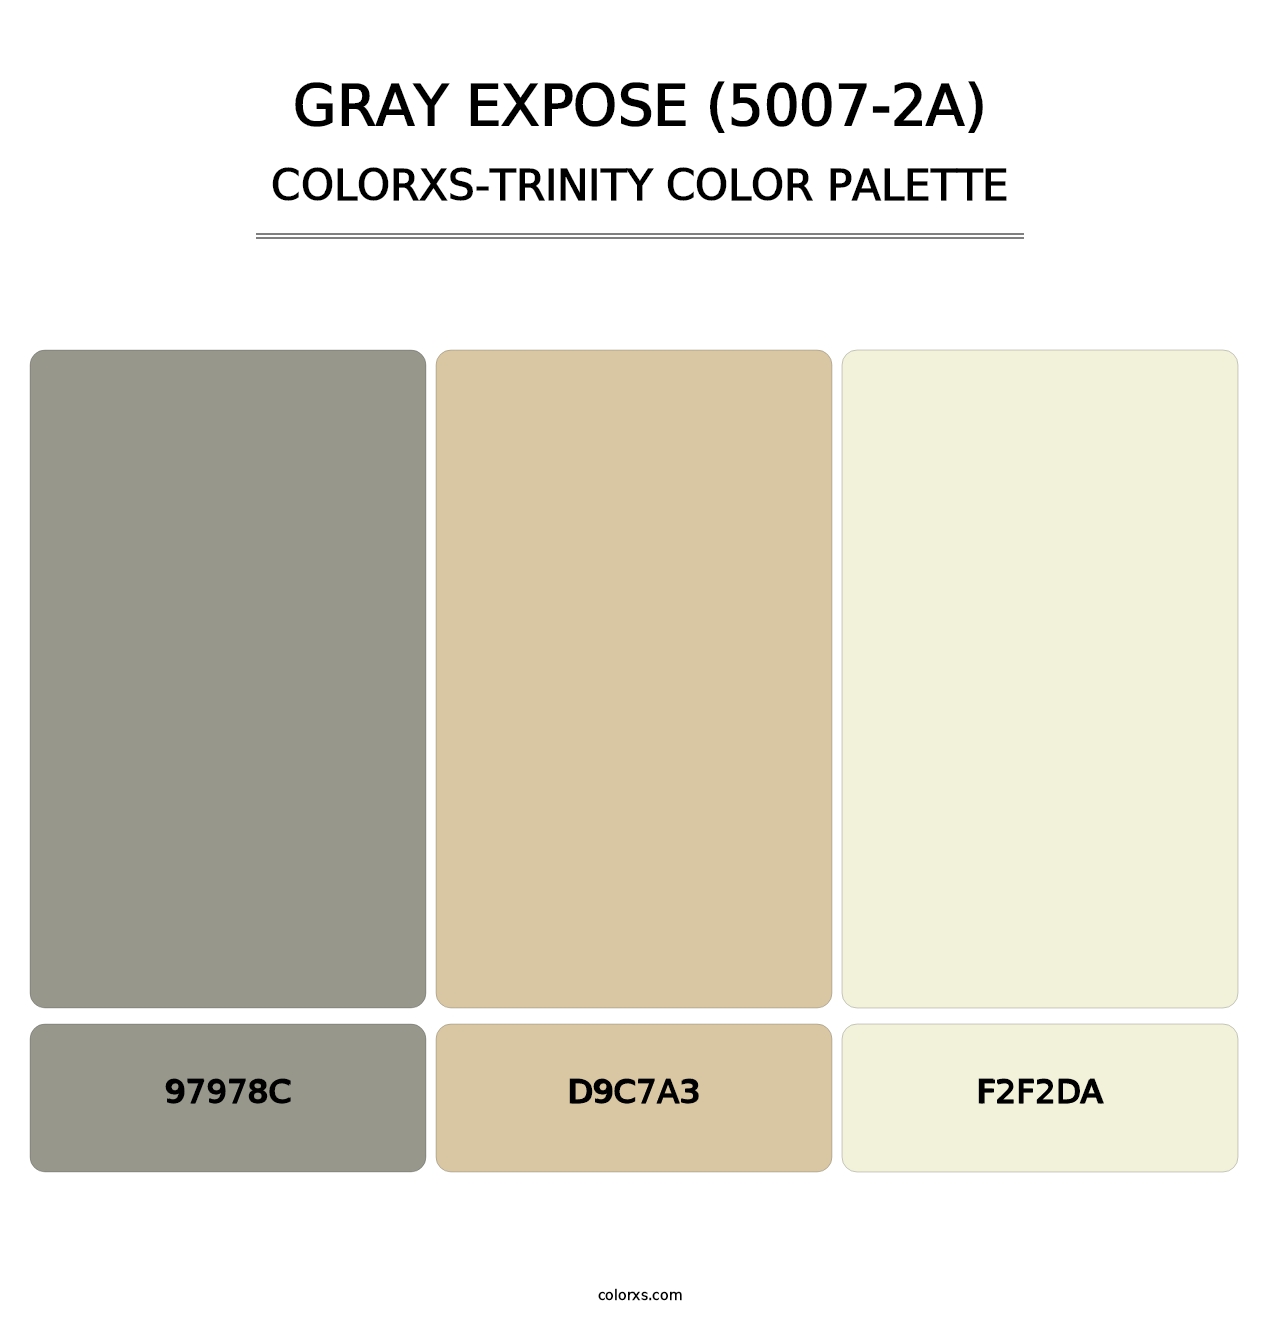 Gray Expose (5007-2A) - Colorxs Trinity Palette